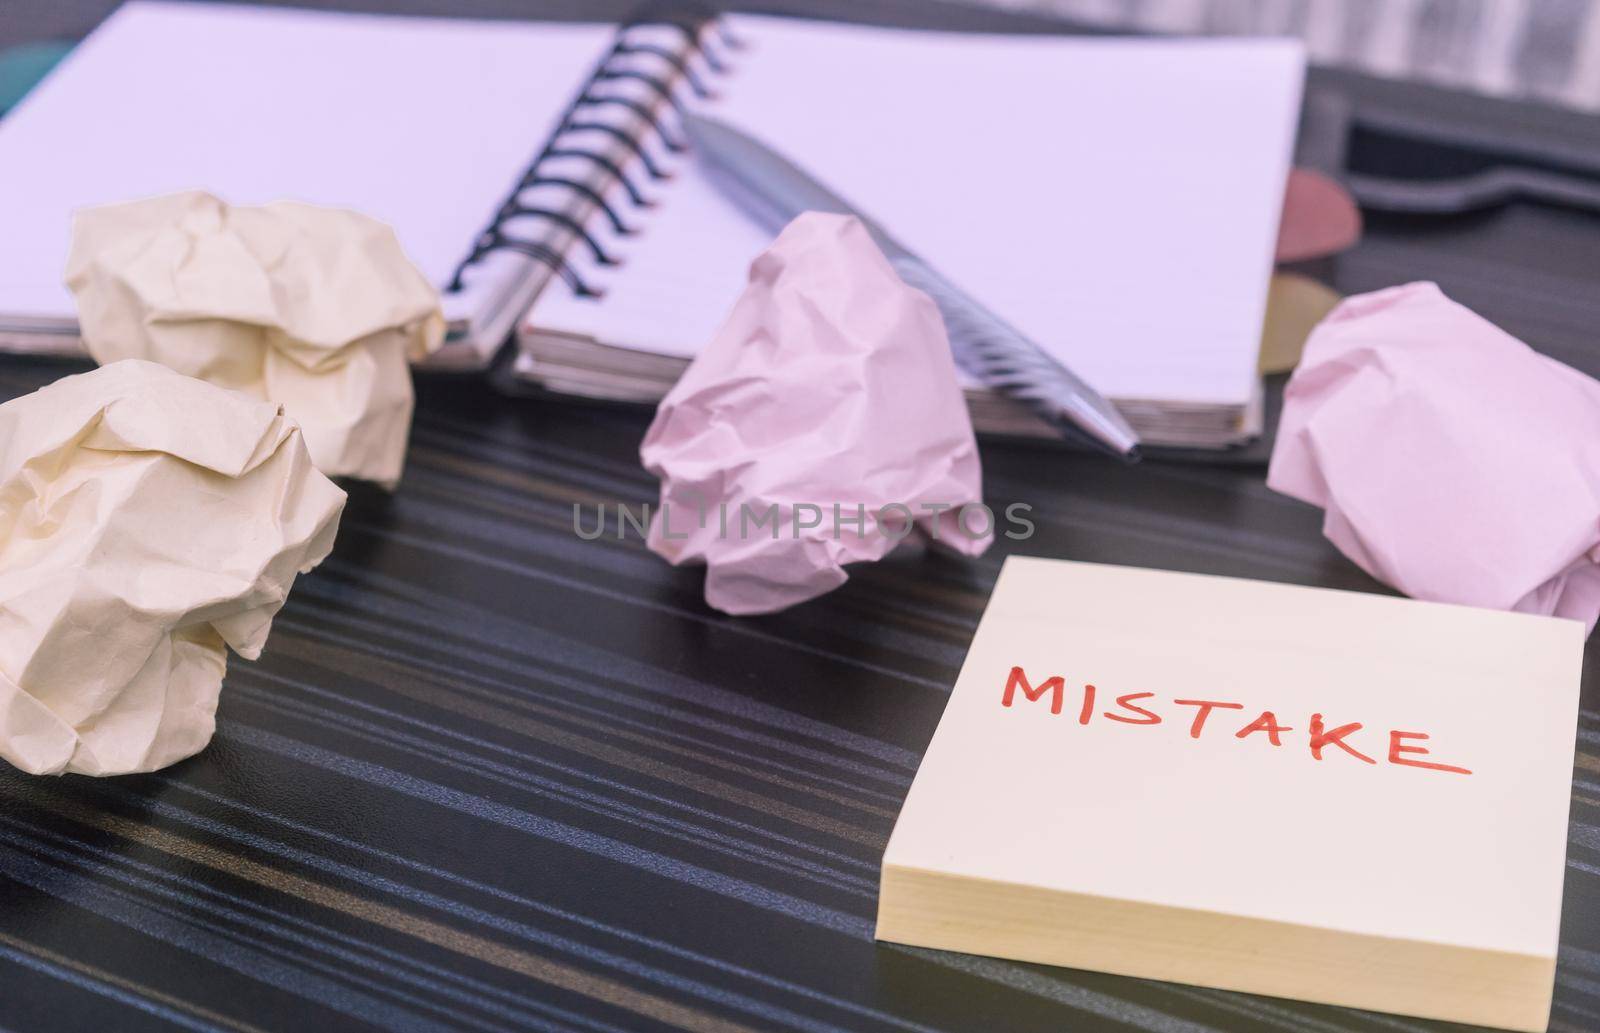 Mistake written on sticky notes. Learning, wrong, blooper, error message, regret sayings background. Fault, defect, careless, lesson correction and reconciliation concept for business finance industry by sudiptabhowmick